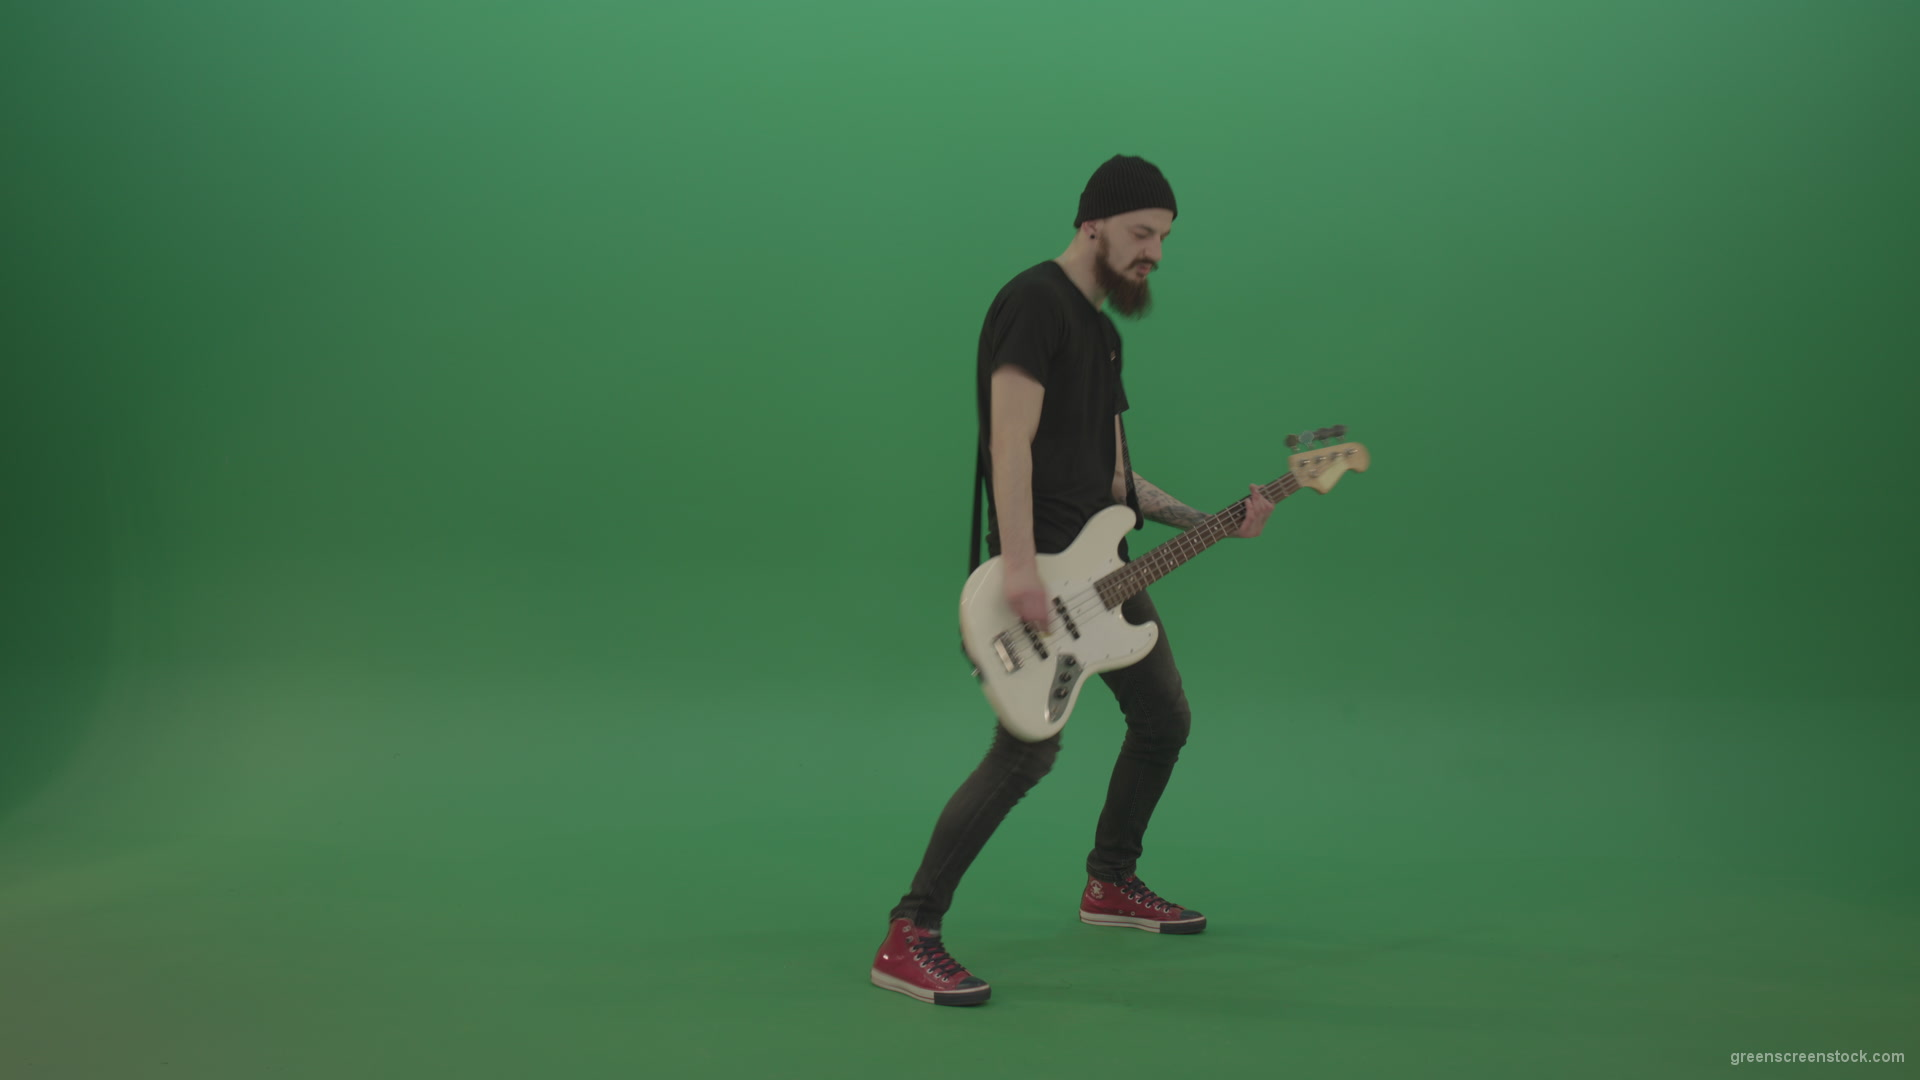 Man-play-music-instrument-bass-guitar-isolated-on-green-screen_002 Green Screen Stock